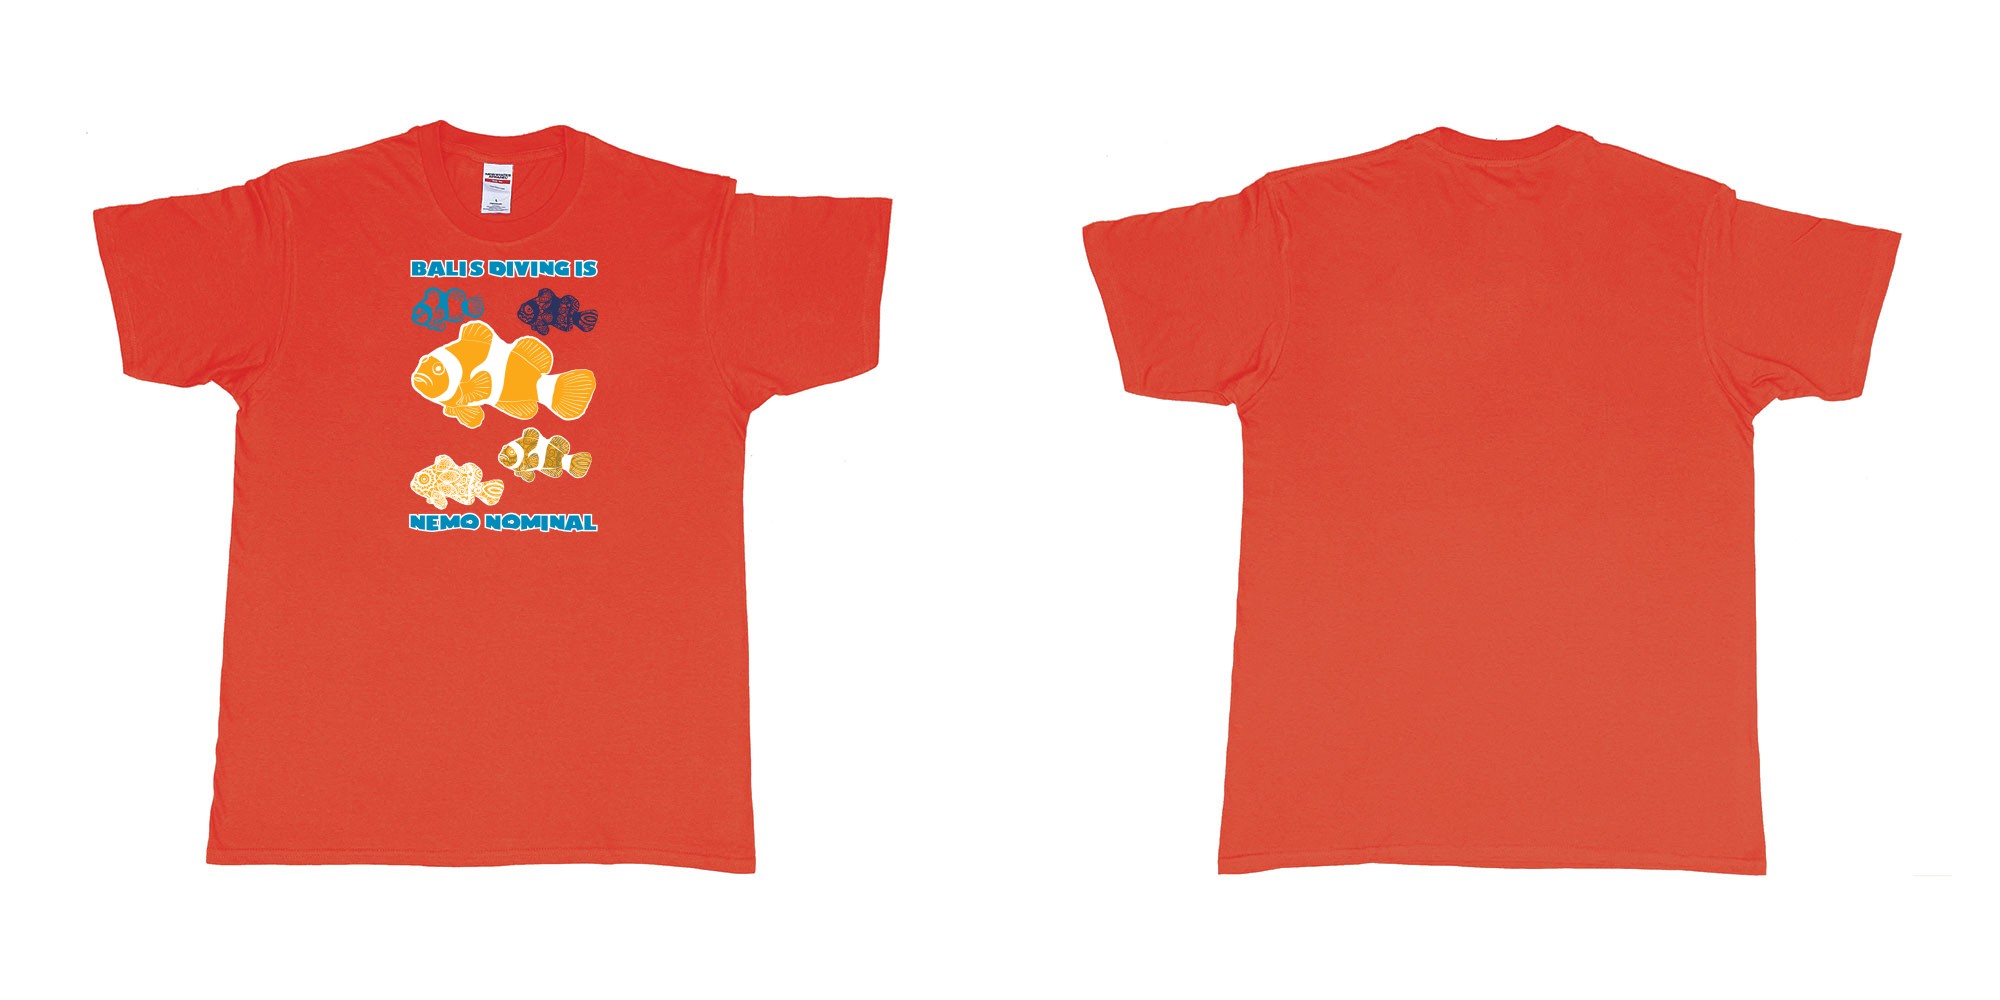 Custom tshirt design bali diving is nemo nominal in fabric color red choice your own text made in Bali by The Pirate Way